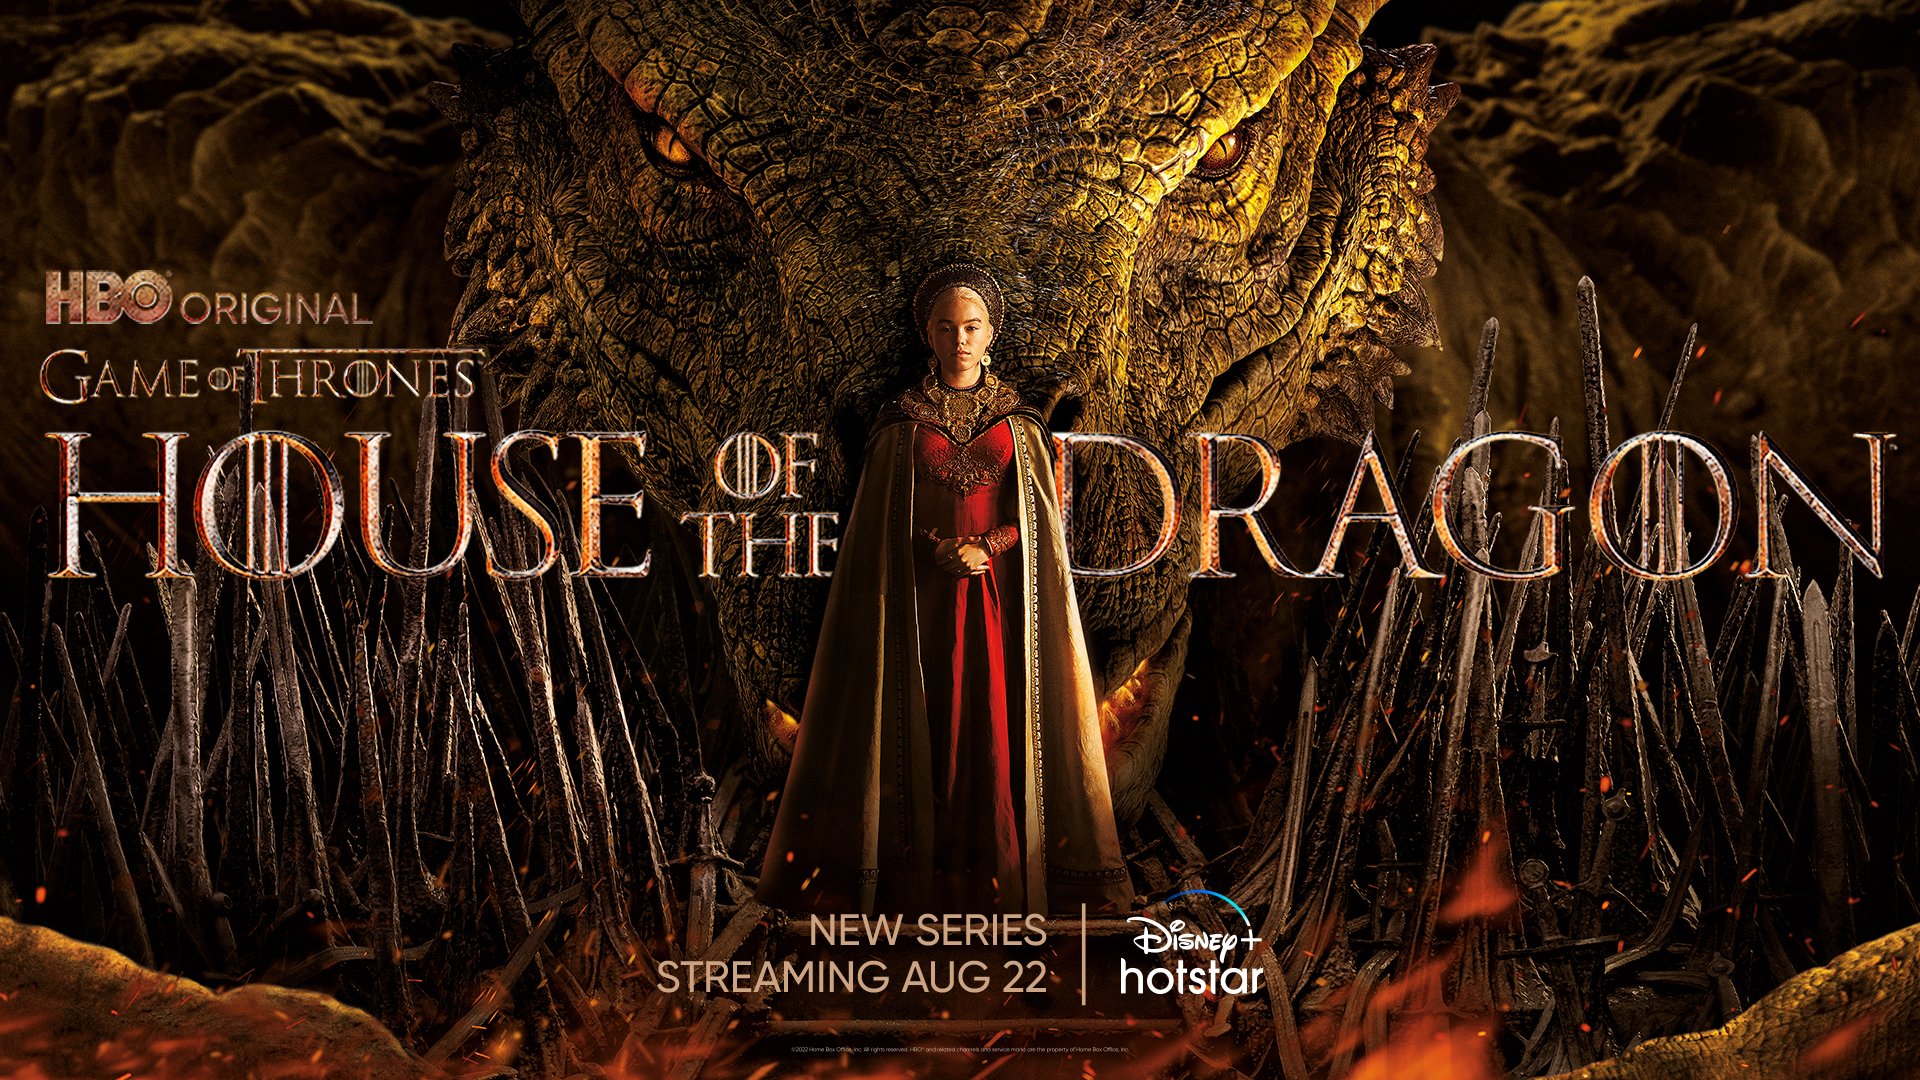 ‘House of the Dragon’ trailer, ‘Game of Thrones’ prequel The story of